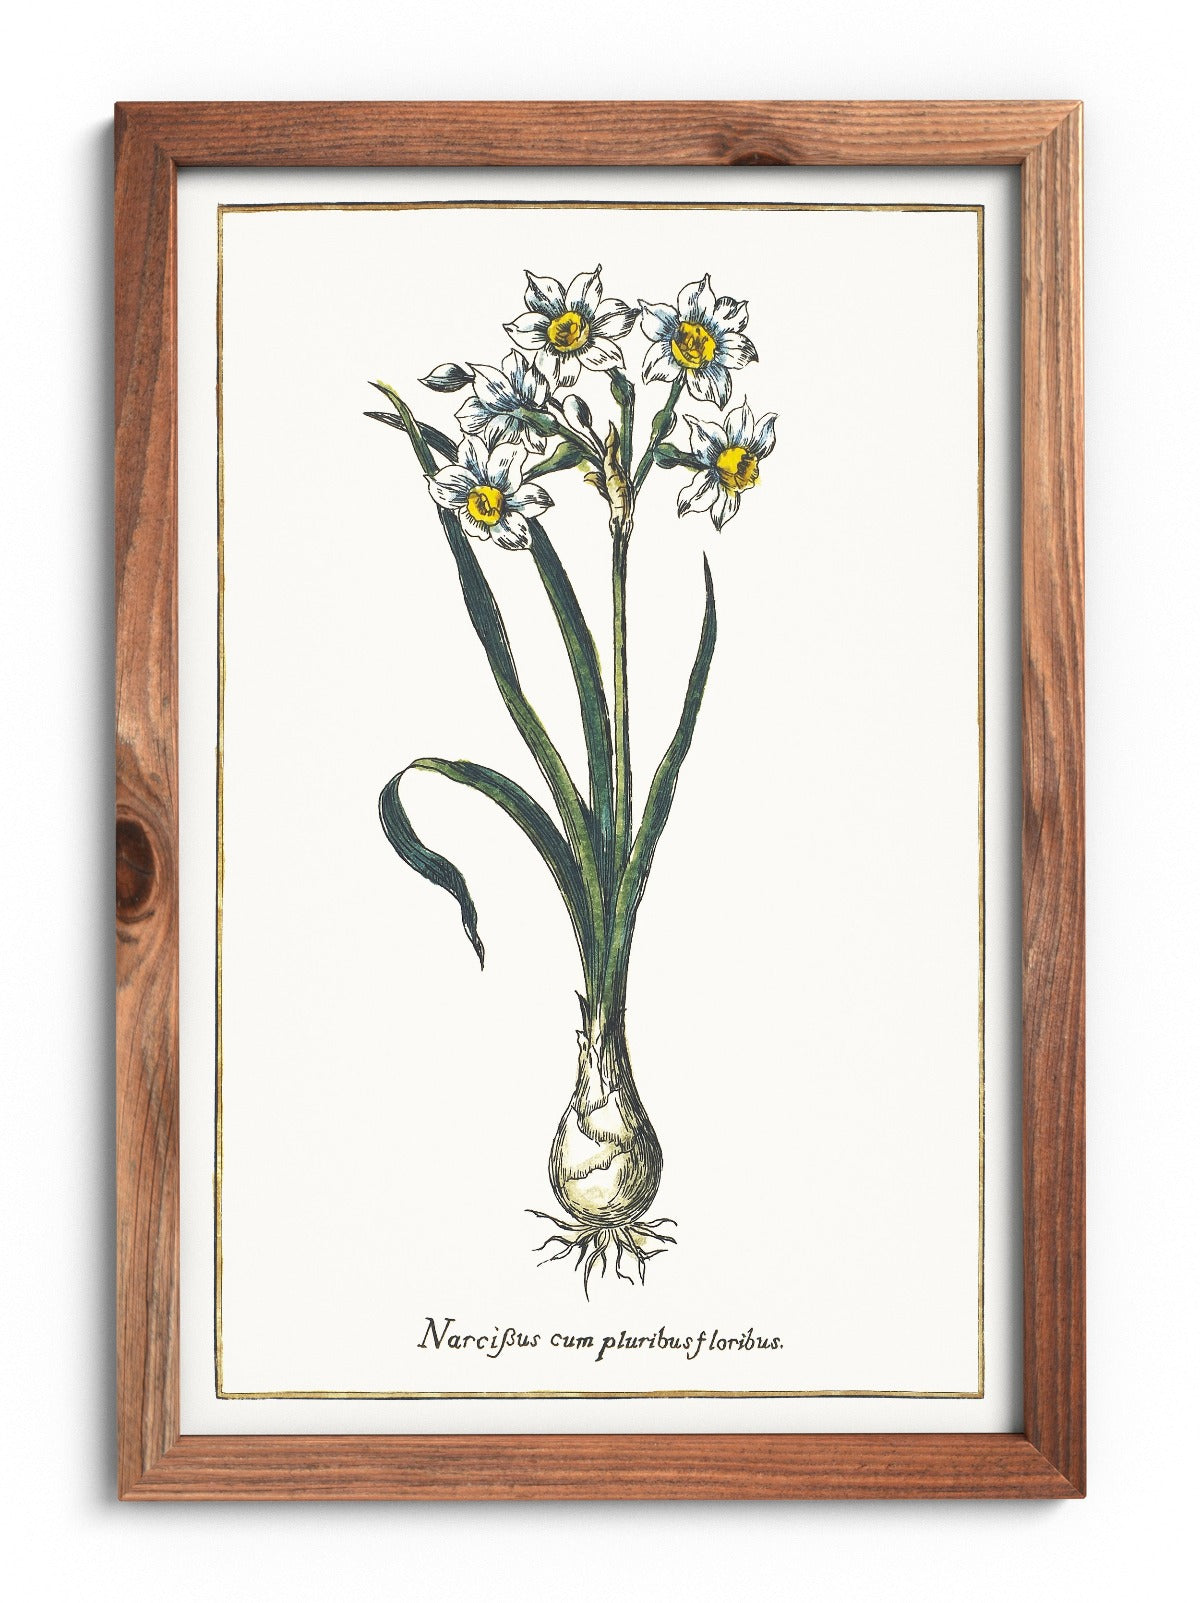 Narcissus multi-flowered poster